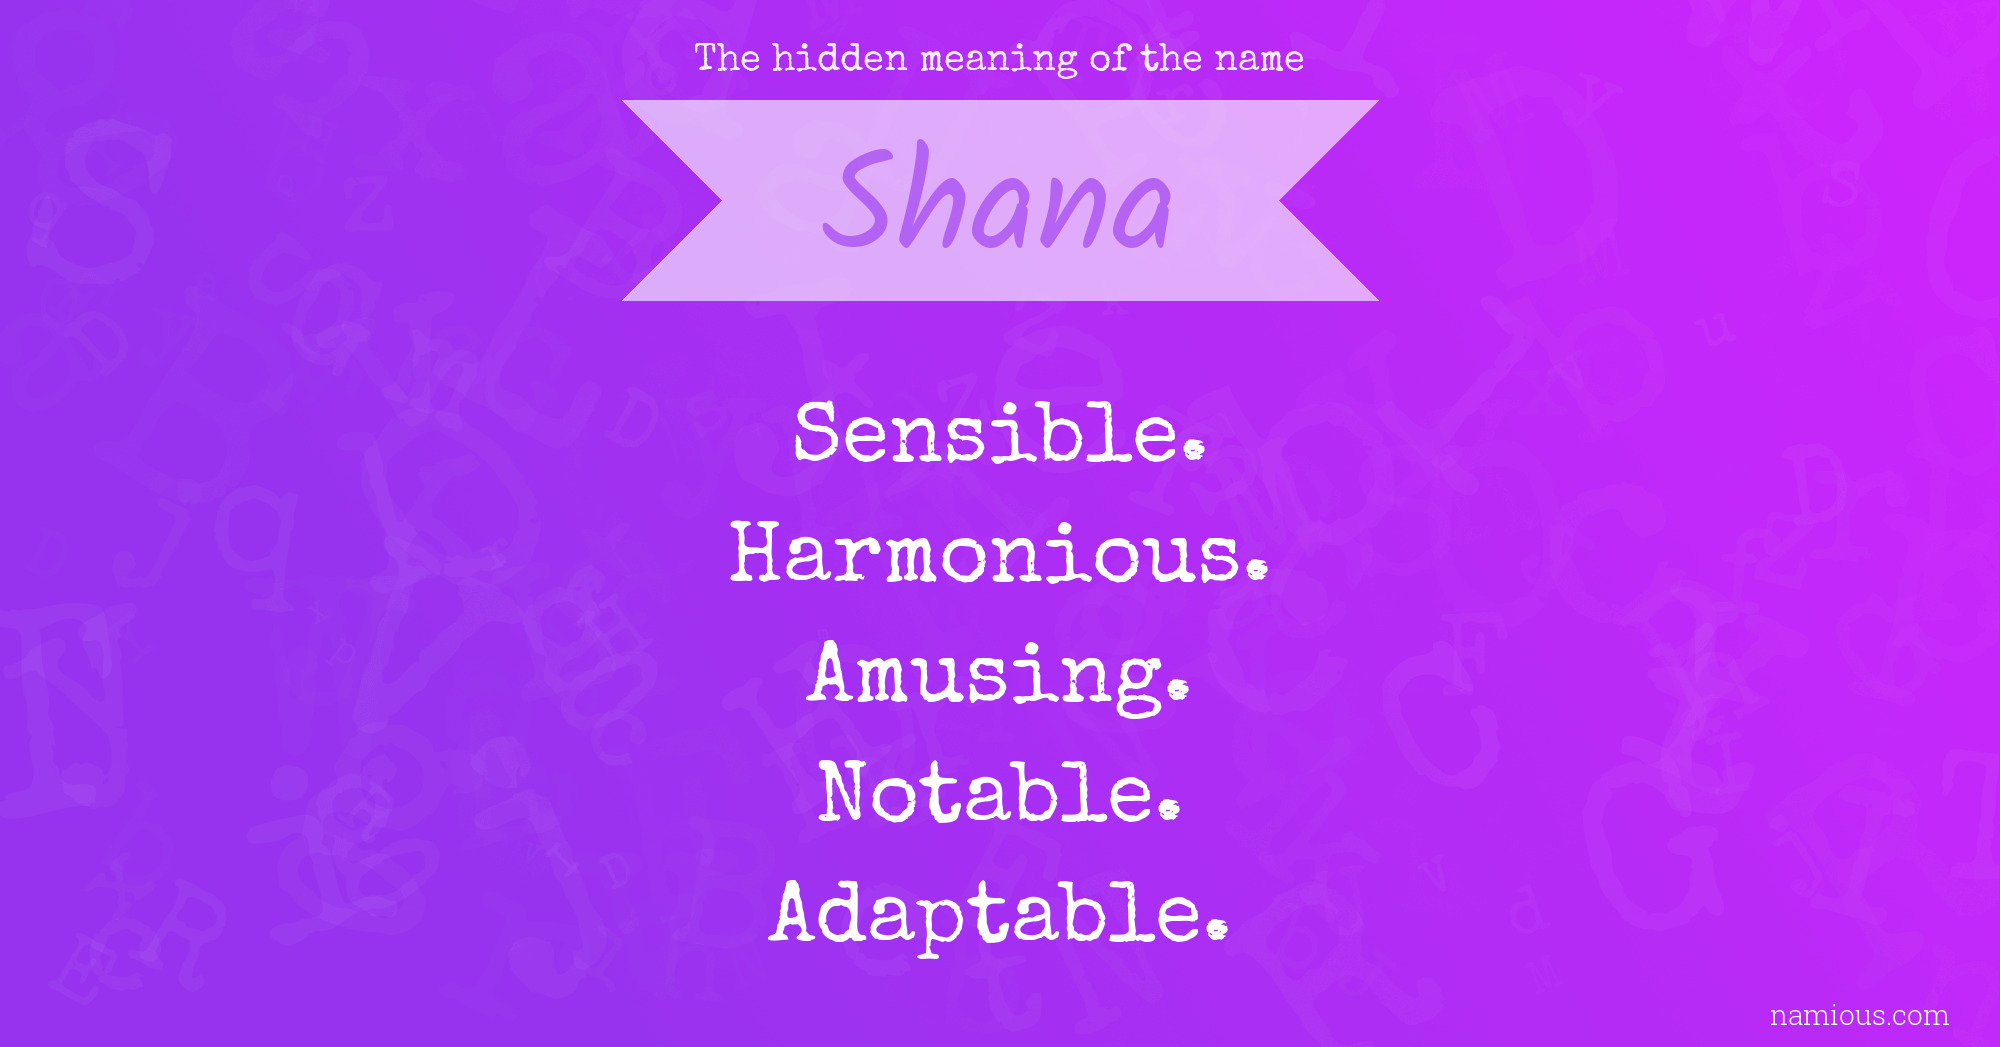 The hidden meaning of the name Shana